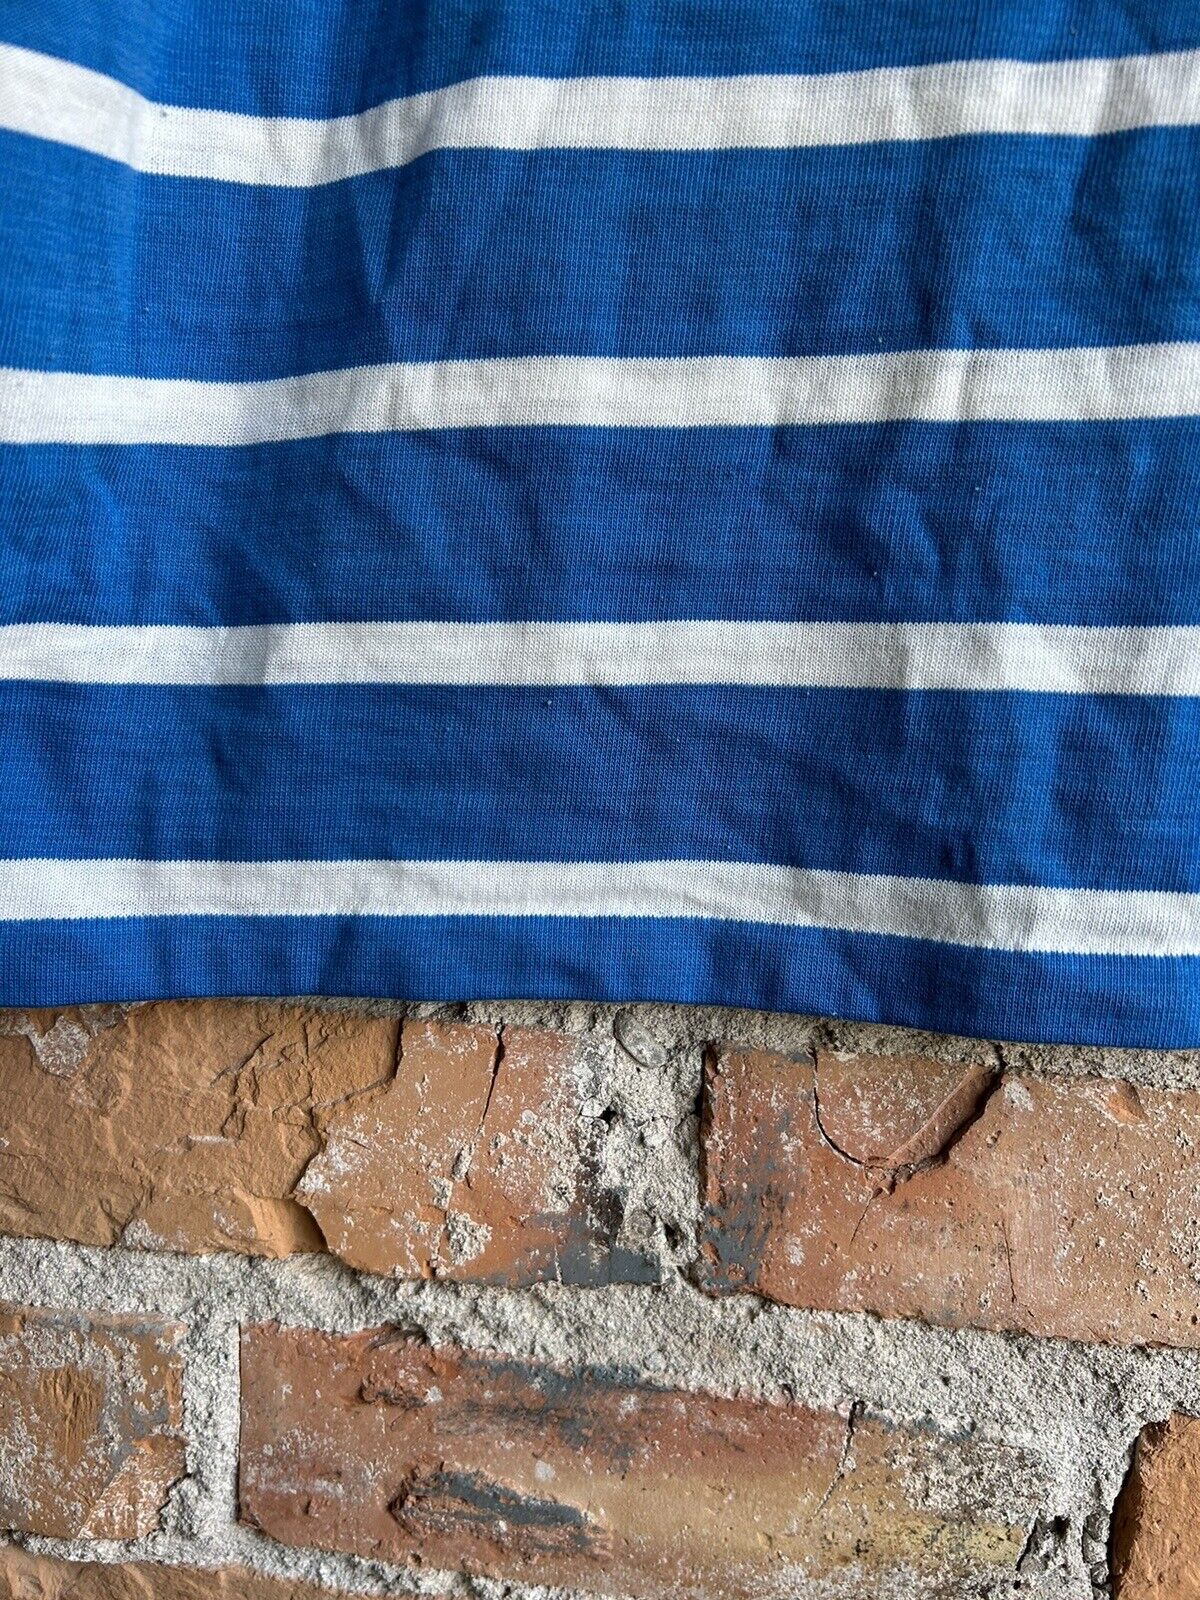 1960s Towncraft Striped Tank Top - image 3